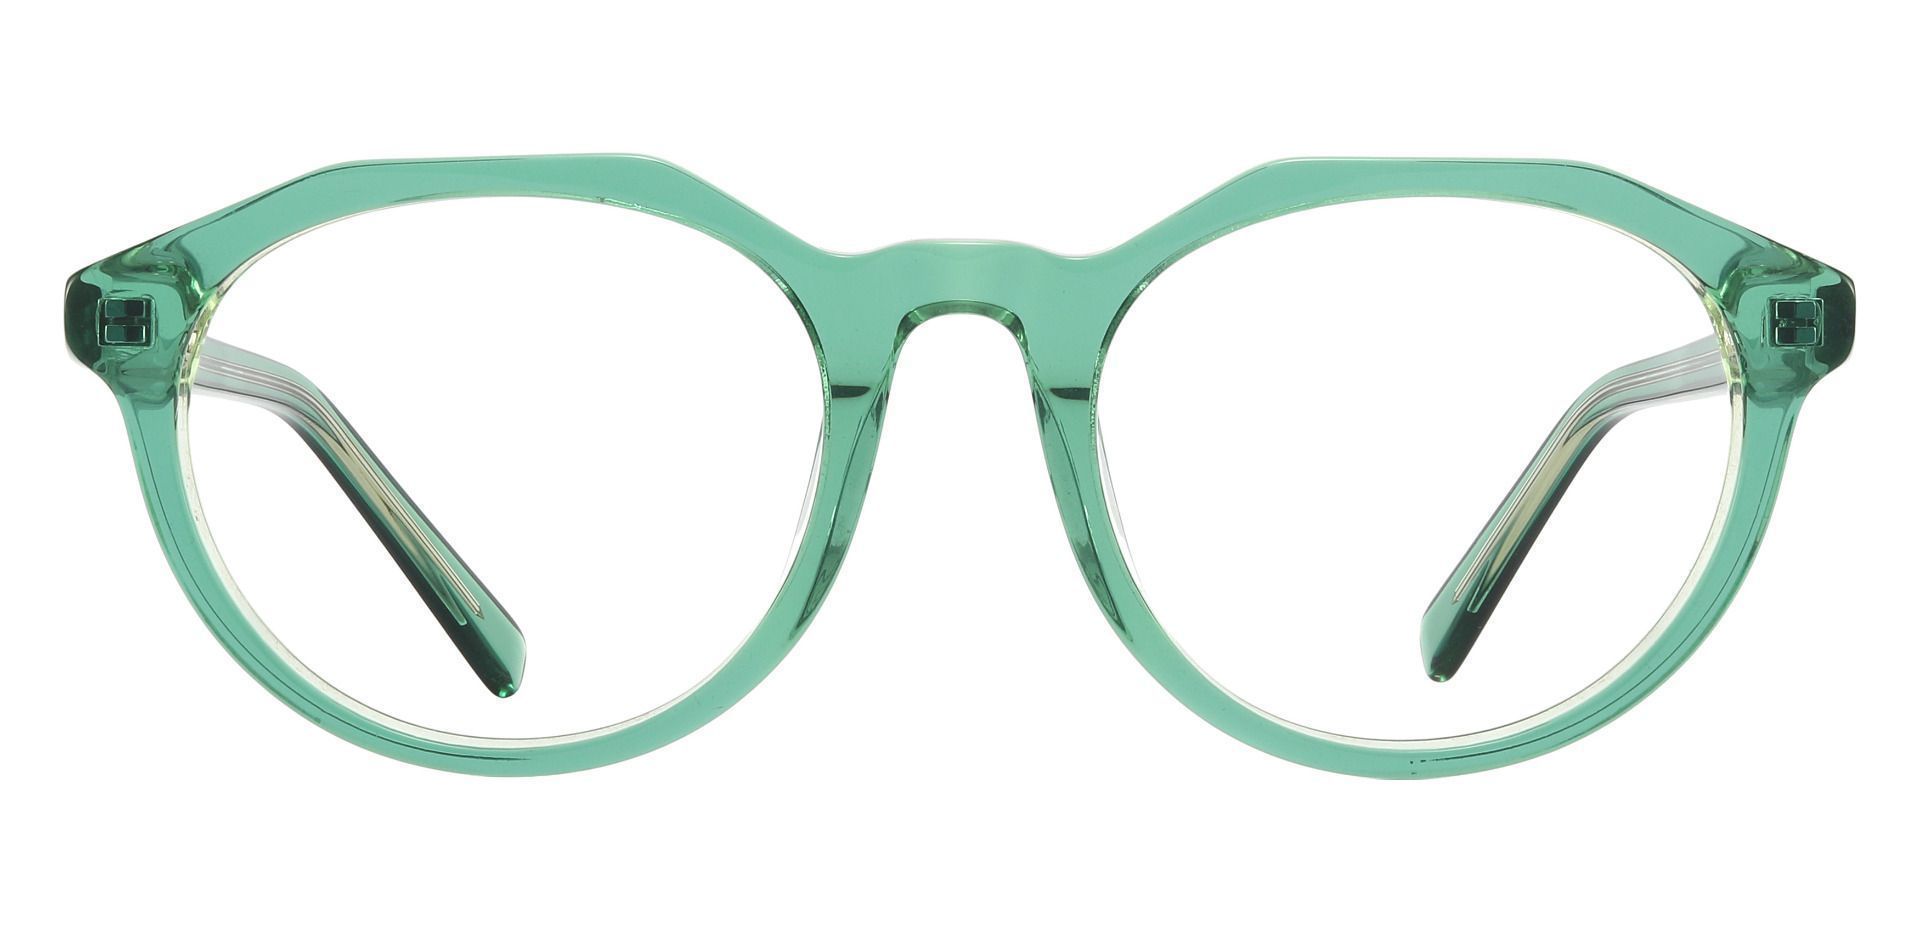 Mayfield Oval Reading Glasses - Green